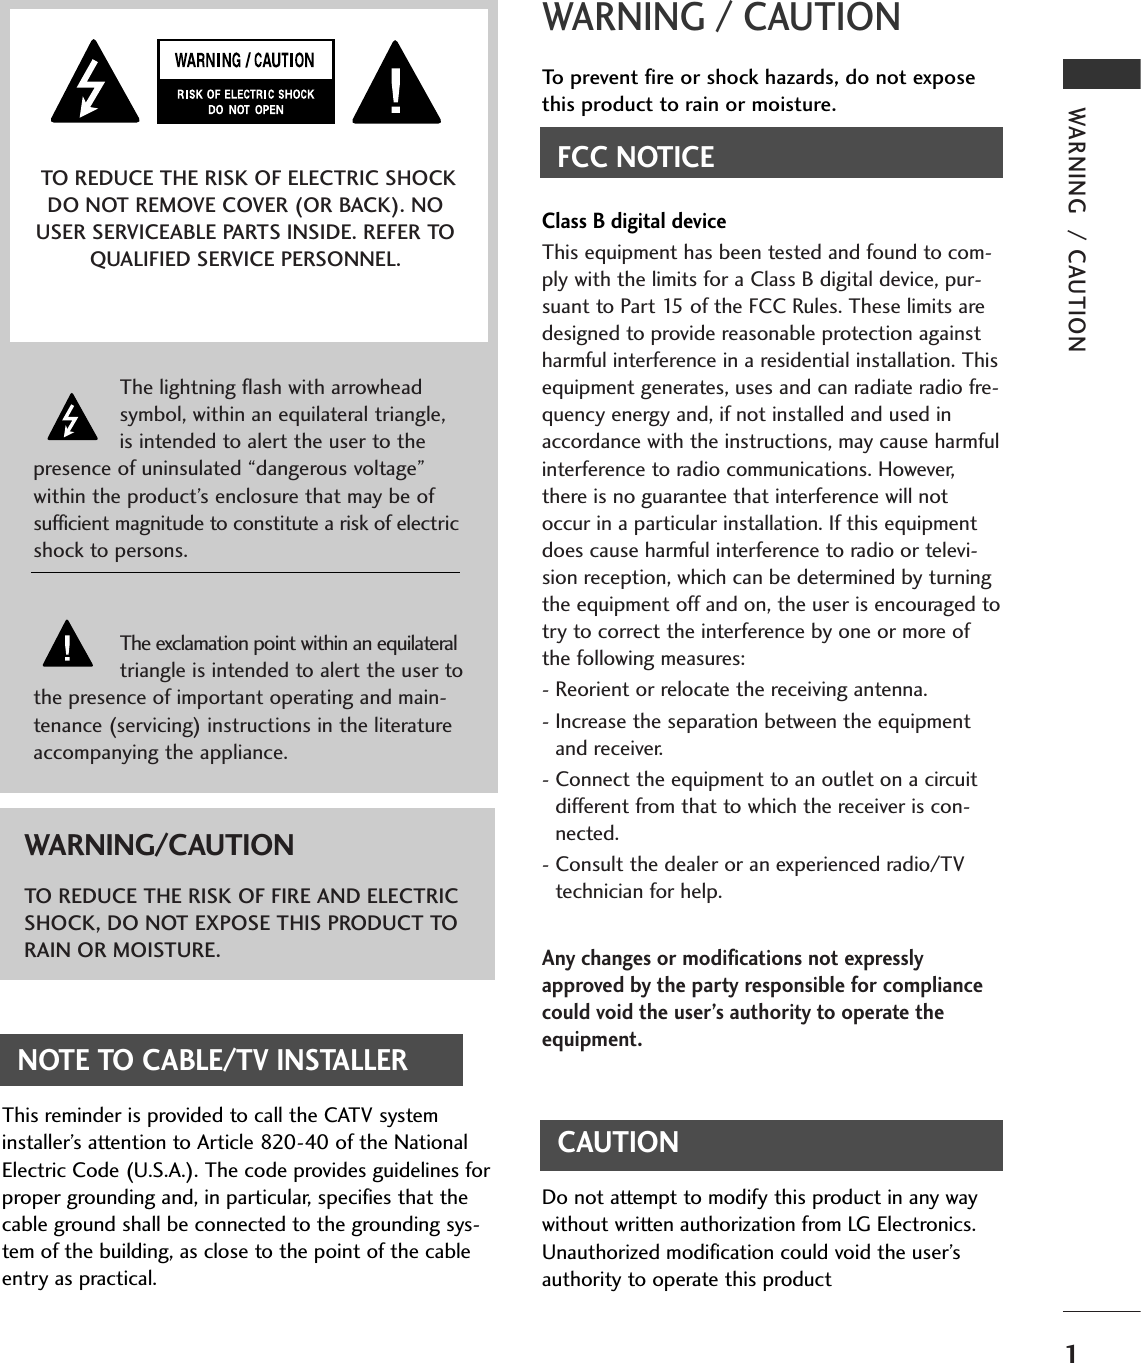 WARNING  / CAUTION1WARNING / CAUTIONTo prevent fire or shock hazards, do not exposethis product to rain or moisture.FCC NOTICEClass B digital deviceThis equipment has been tested and found to com-ply with the limits for a Class B digital device, pur-suant to Part 15 of the FCC Rules. These limits aredesigned to provide reasonable protection againstharmful interference in a residential installation. Thisequipment generates, uses and can radiate radio fre-quency energy and, if not installed and used inaccordance with the instructions, may cause harmfulinterference to radio communications. However,there is no guarantee that interference will notoccur in a particular installation. If this equipmentdoes cause harmful interference to radio or televi-sion reception, which can be determined by turningthe equipment off and on, the user is encouraged totry to correct the interference by one or more ofthe following measures:- Reorient or relocate the receiving antenna.- Increase the separation between the equipmentand receiver.- Connect the equipment to an outlet on a circuitdifferent from that to which the receiver is con-nected.- Consult the dealer or an experienced radio/TVtechnician for help.Any changes or modifications not expresslyapproved by the party responsible for compliancecould void the user’s authority to operate theequipment.CAUTIONDo not attempt to modify this product in any waywithout written authorization from LG Electronics.Unauthorized modification could void the user’sauthority to operate this product The lightning flash with arrowheadsymbol, within an equilateral triangle,is intended to alert the user to thepresence of uninsulated “dangerous voltage”within the product’s enclosure that may be ofsufficient magnitude to constitute a risk of electricshock to persons.The exclamation point within an equilateraltriangle is intended to alert the user tothe presence of important operating and main-tenance (servicing) instructions in the literatureaccompanying the appliance.TO REDUCE THE RISK OF ELECTRIC SHOCKDO NOT REMOVE COVER (OR BACK). NOUSER SERVICEABLE PARTS INSIDE. REFER TOQUALIFIED SERVICE PERSONNEL.WARNING/CAUTIONTO REDUCE THE RISK OF FIRE AND ELECTRICSHOCK, DO NOT EXPOSE THIS PRODUCT TORAIN OR MOISTURE.NOTE TO CABLE/TV INSTALLERThis reminder is provided to call the CATV systeminstaller’s attention to Article 820-40 of the NationalElectric Code (U.S.A.). The code provides guidelines forproper grounding and, in particular, specifies that thecable ground shall be connected to the grounding sys-tem of the building, as close to the point of the cableentry as practical.